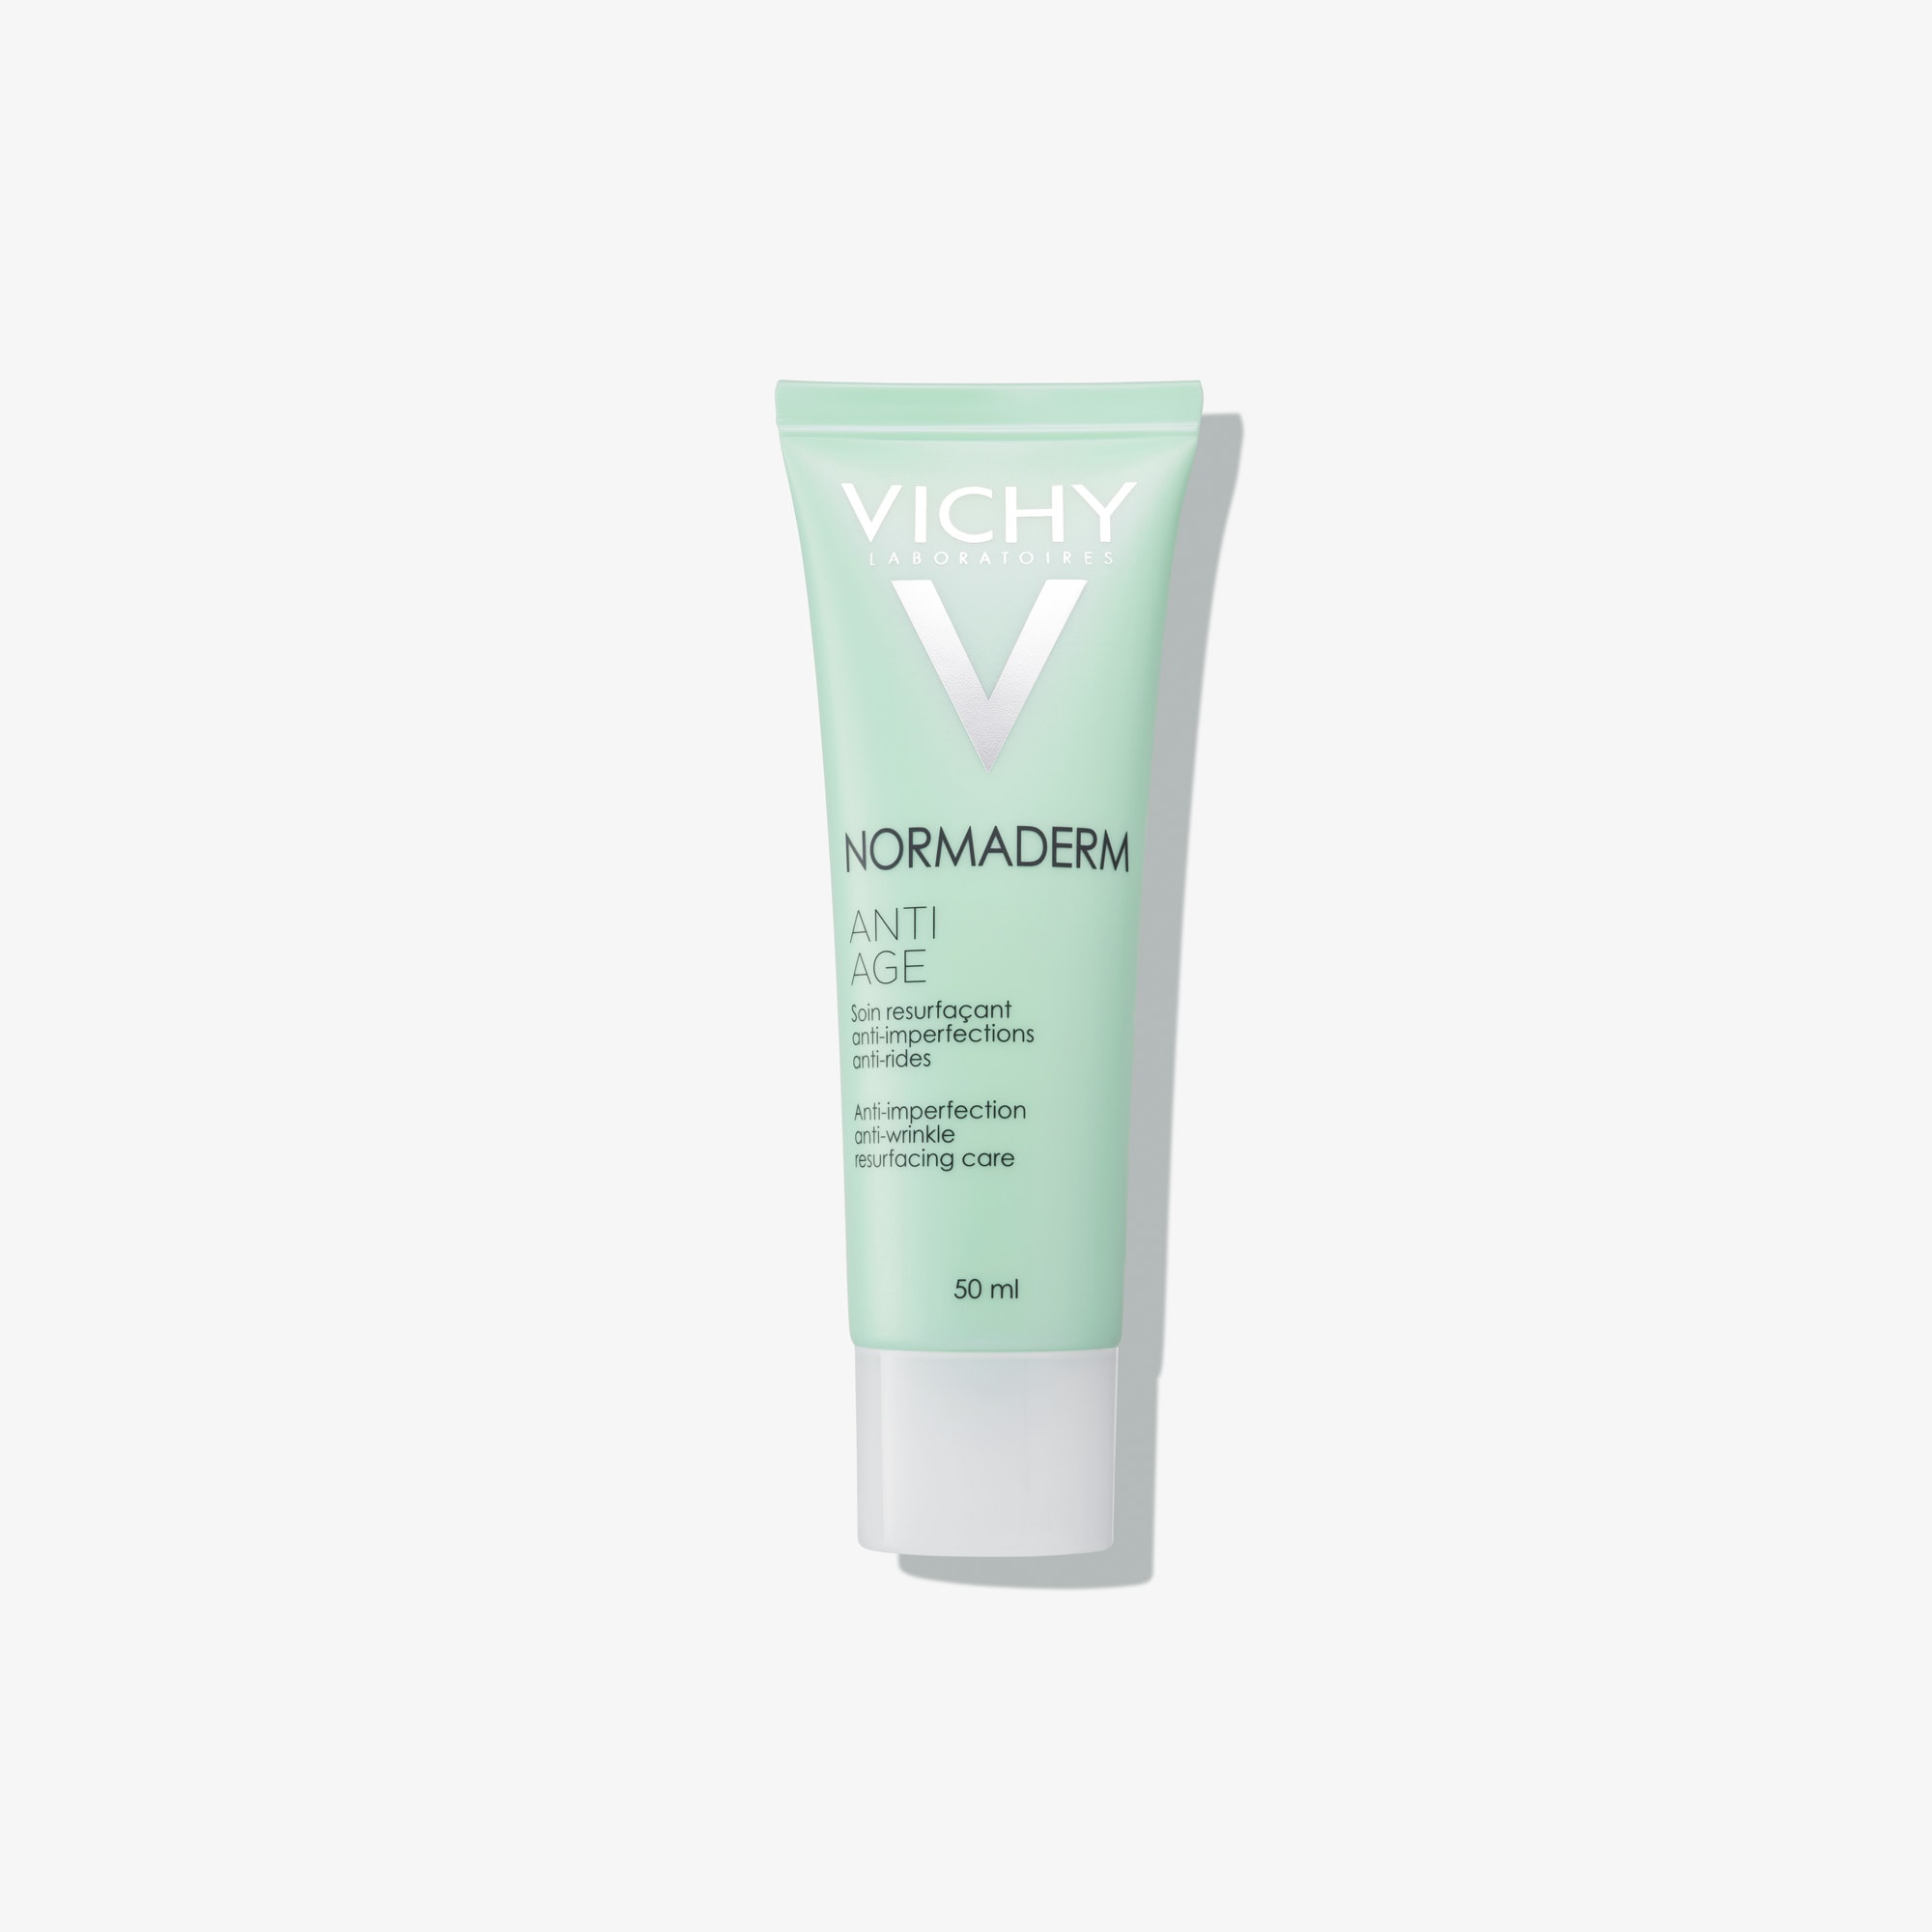 VICHY_NORMADERM_ANTI-AGE (1)